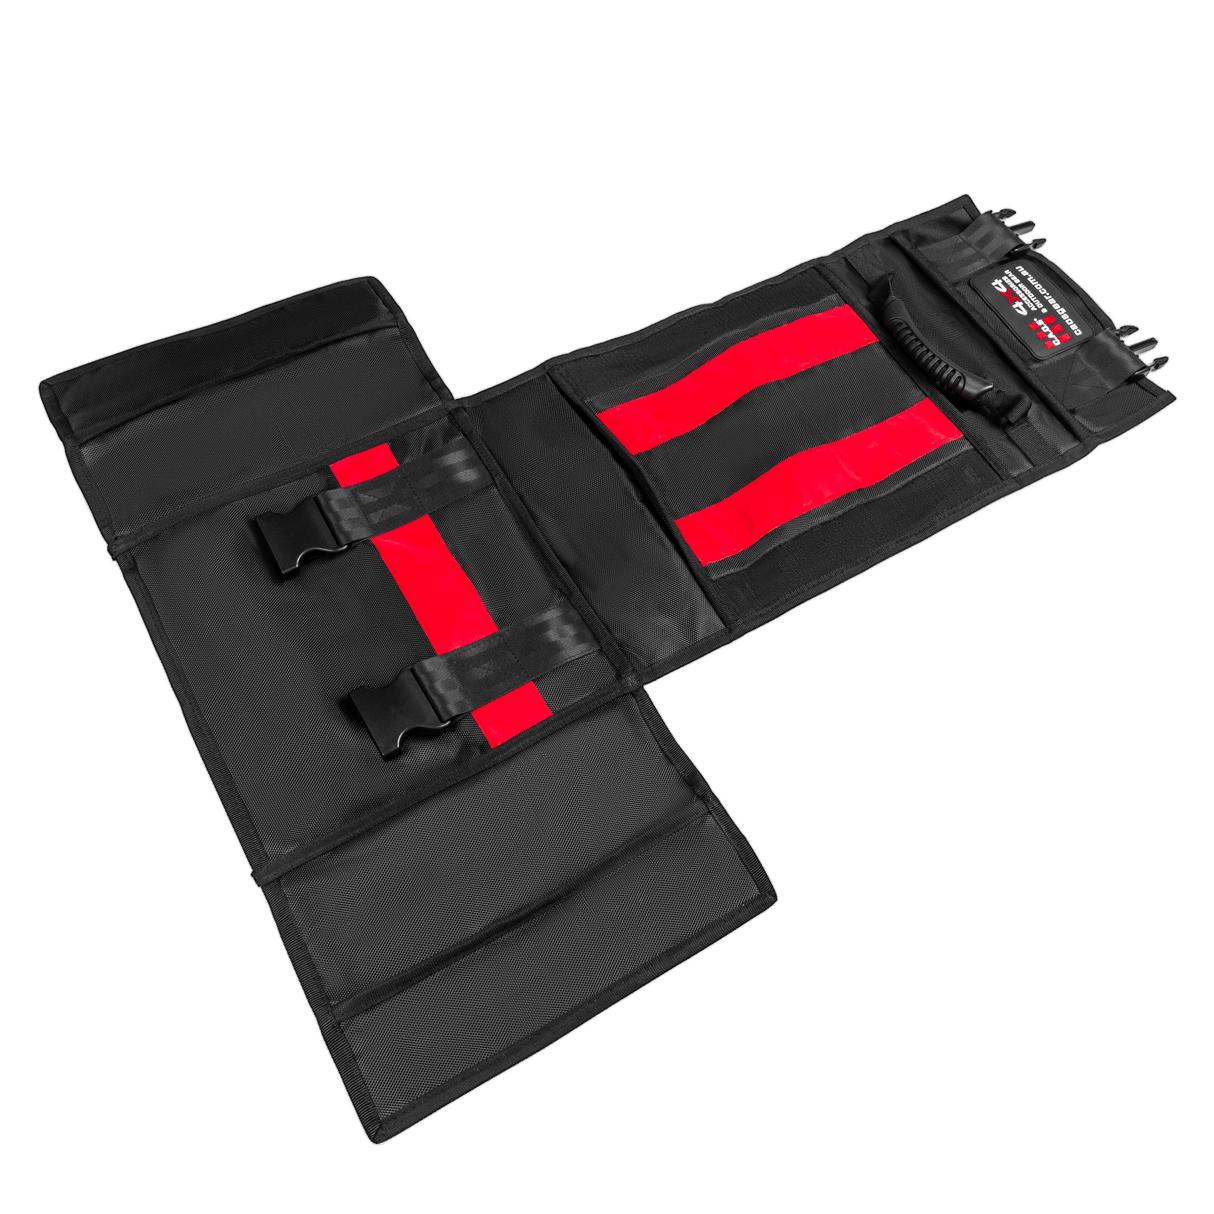 CAOS Compact Recovery Bag – CAOS Gear